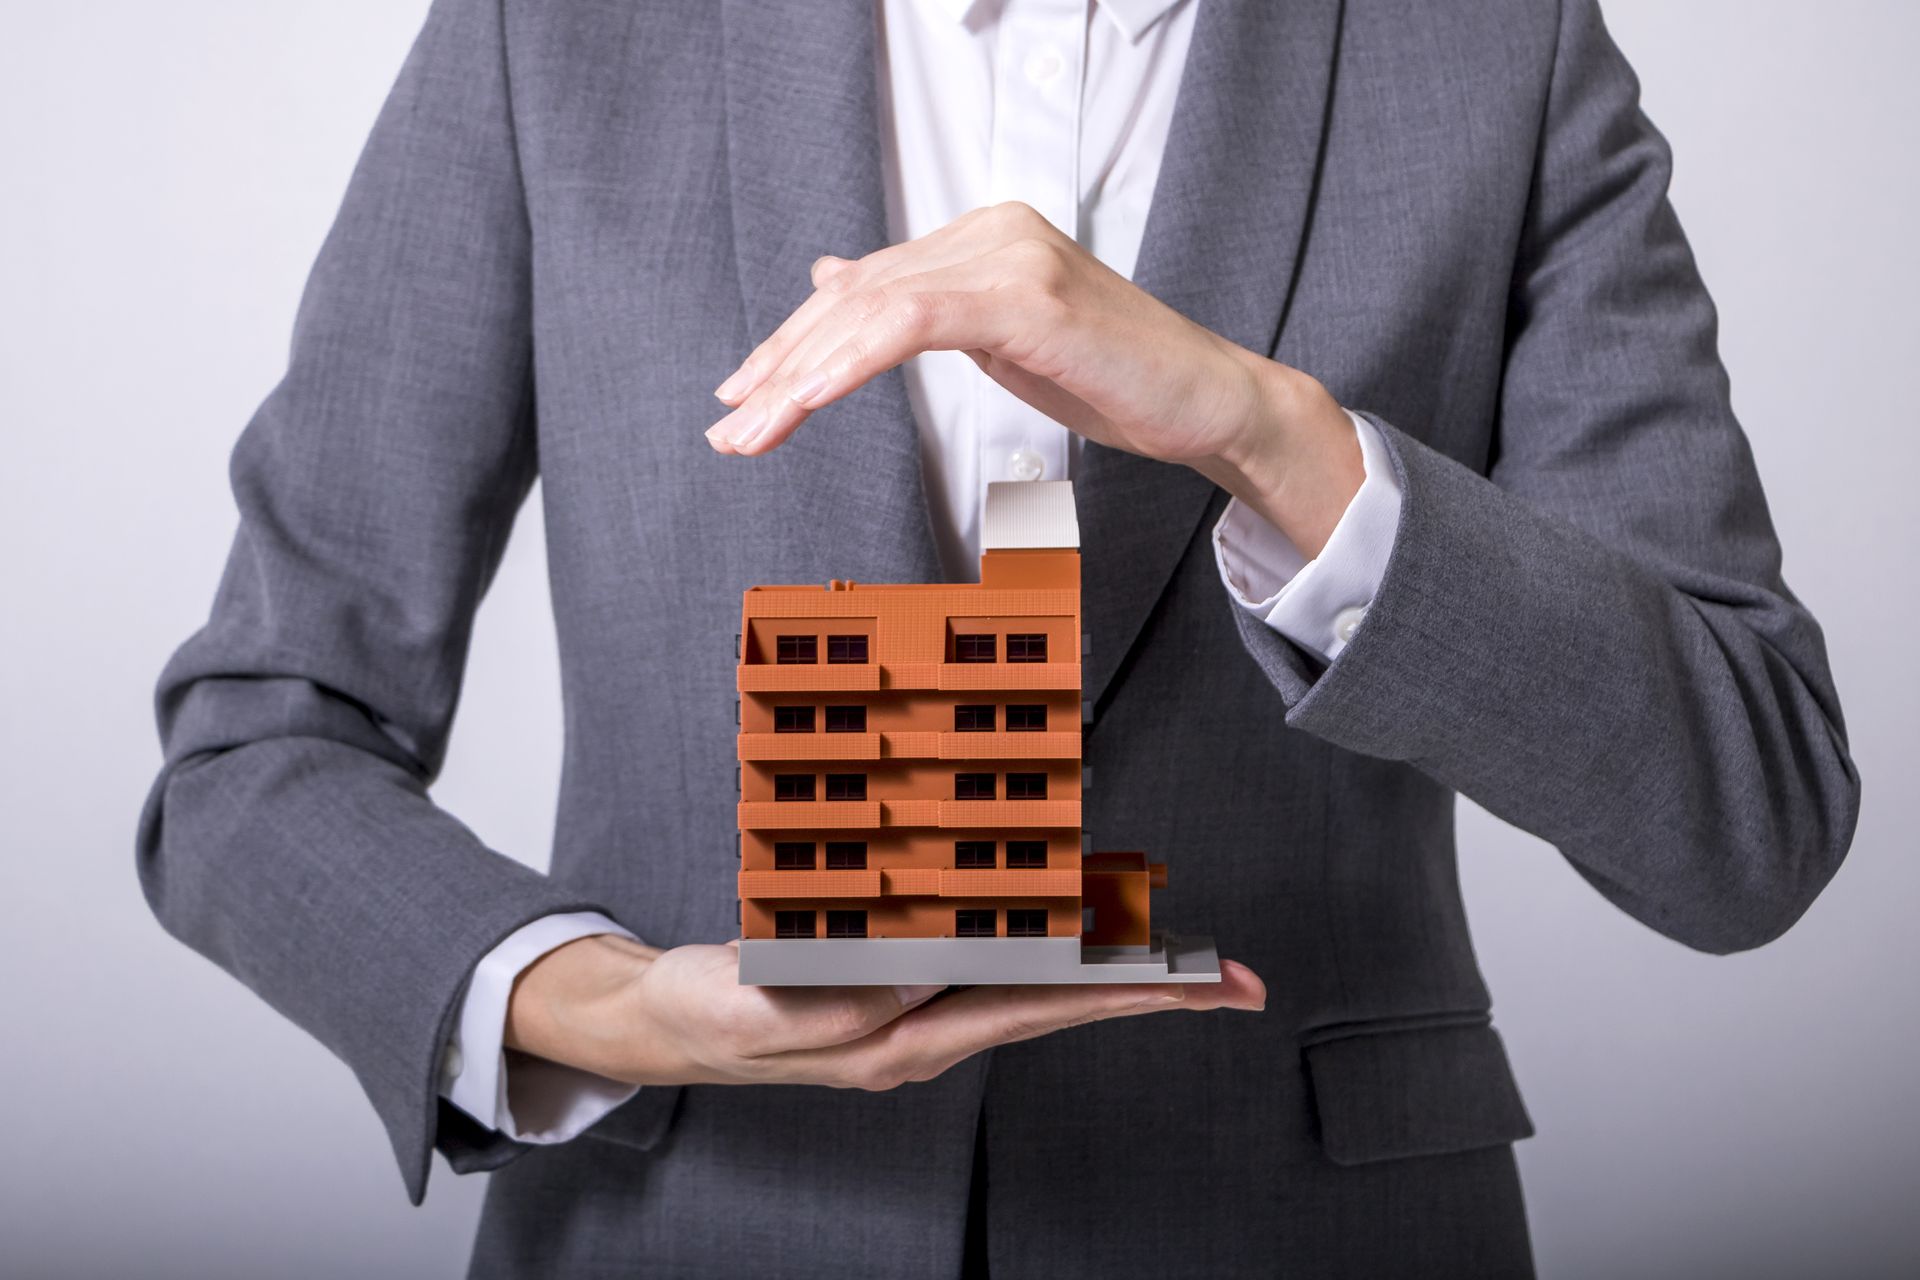 a man in a suit is holding a model of a building